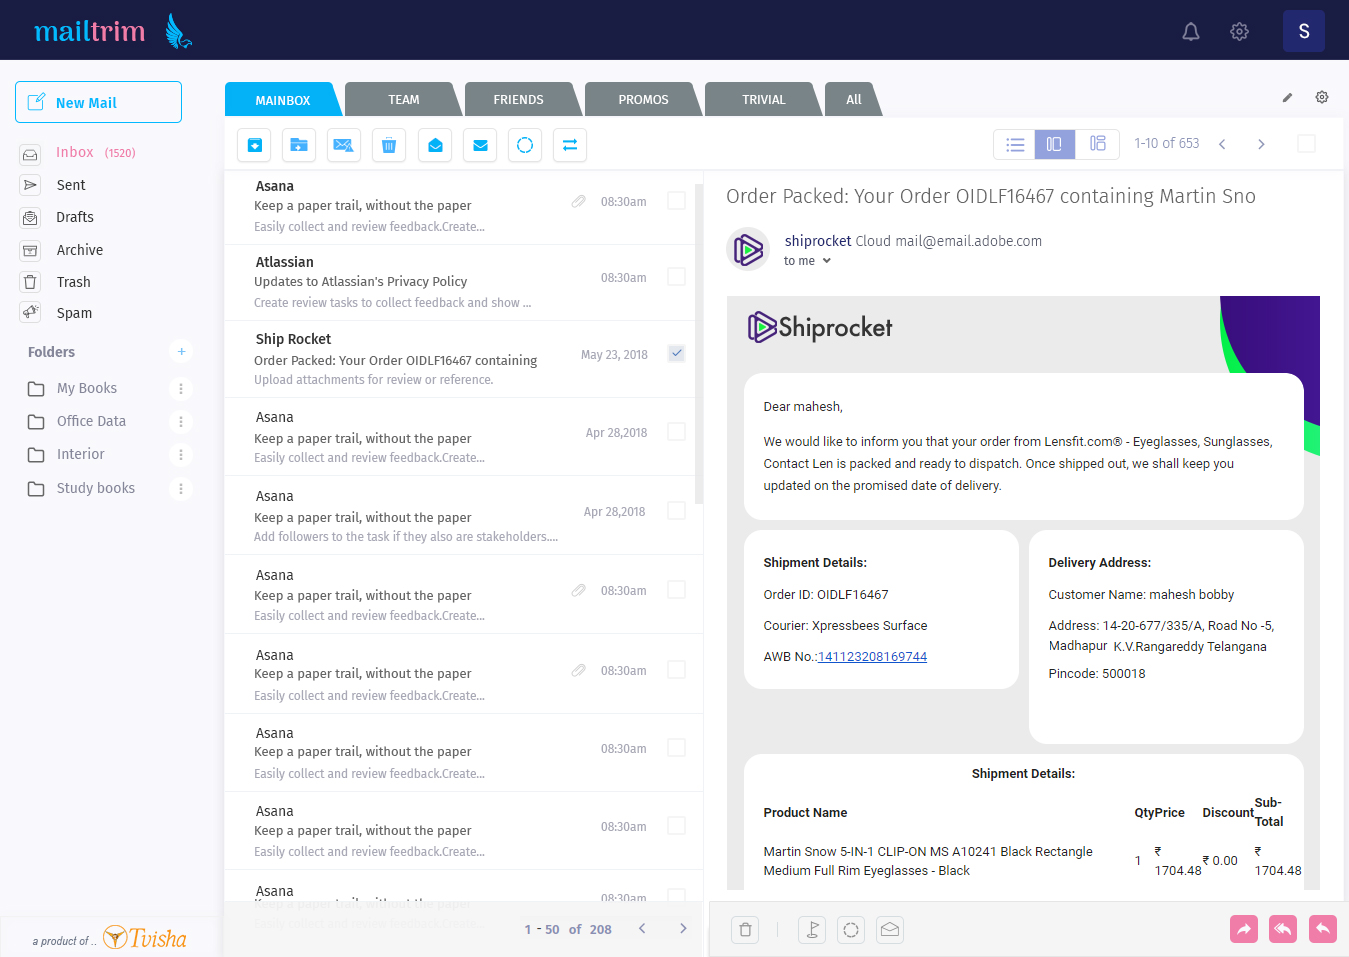 Mailtrim’s First Beta Version for Windows is Here!